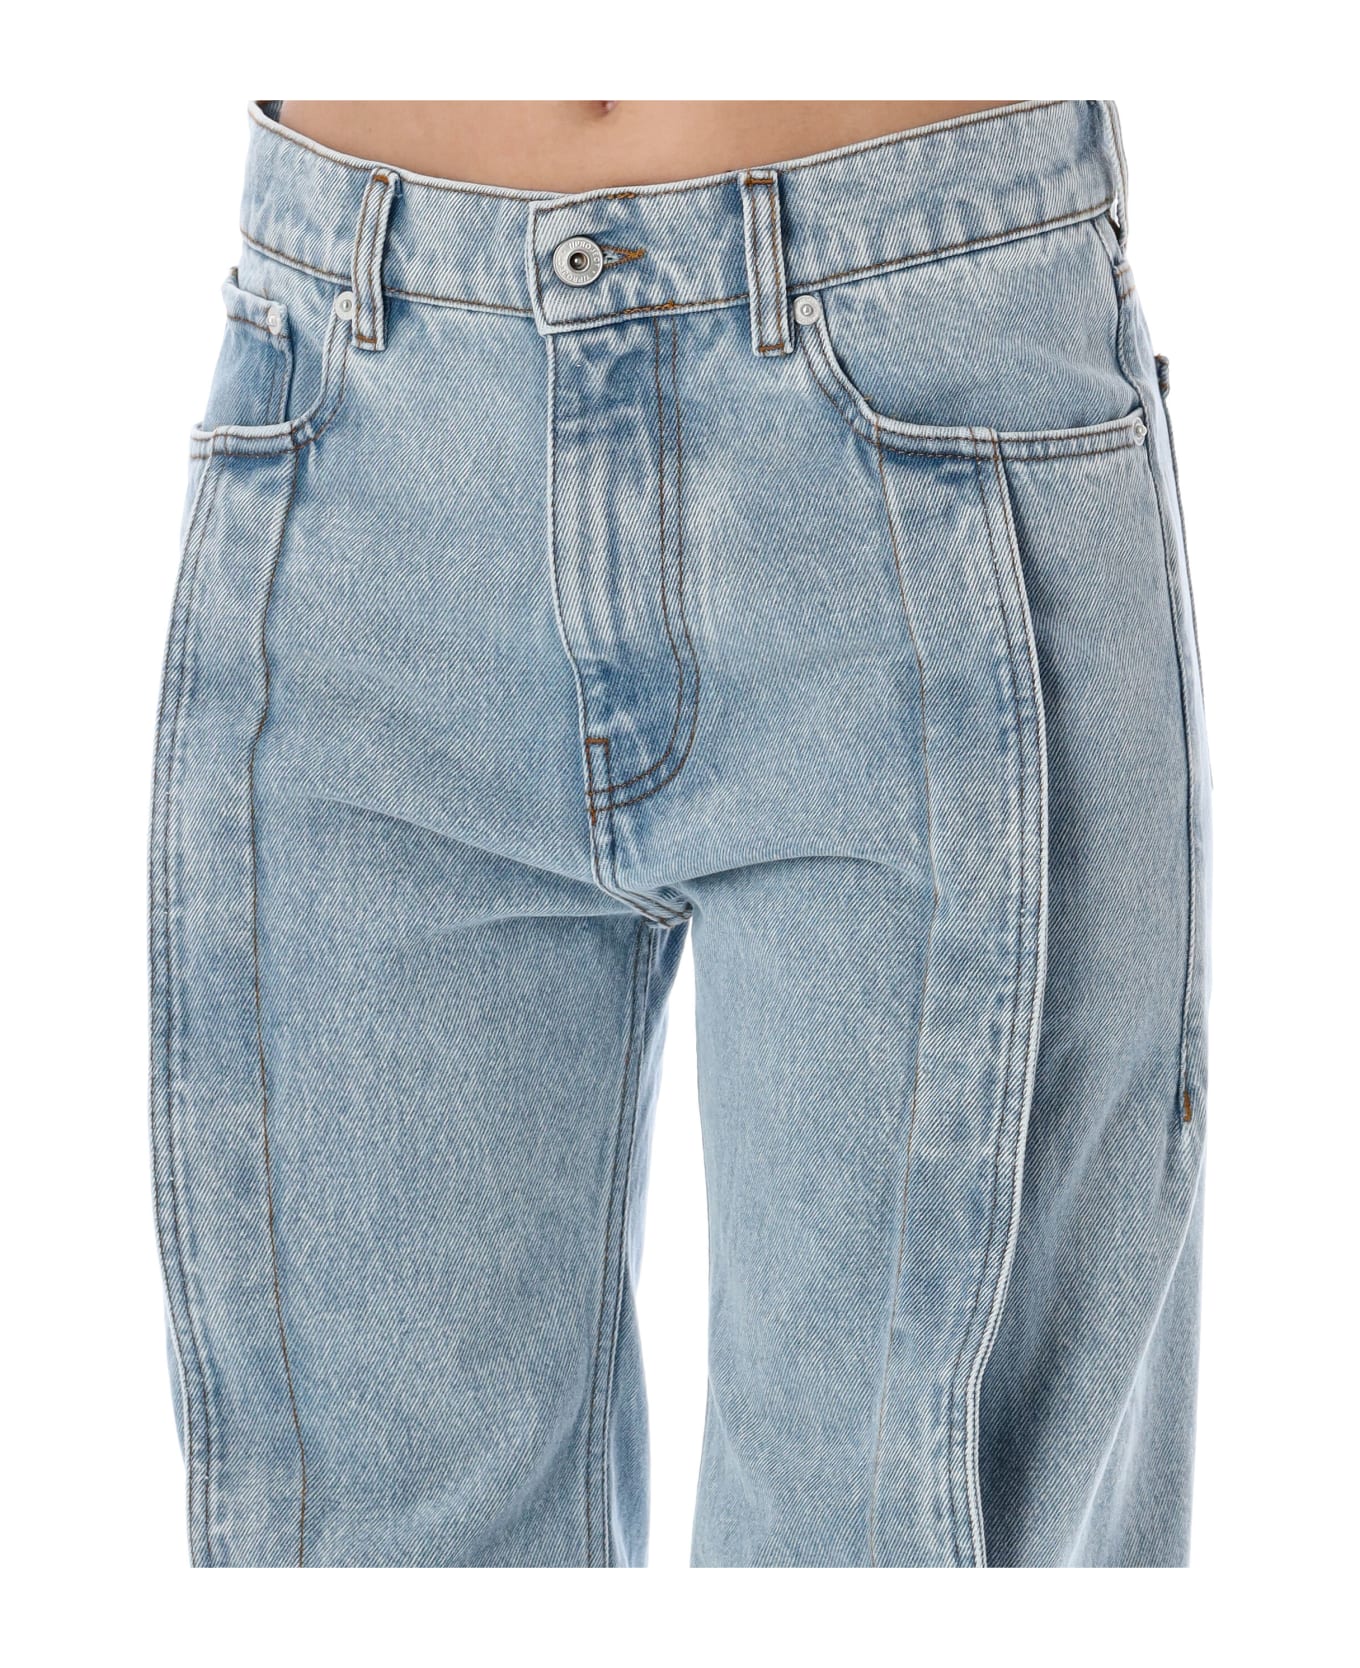 Y/Project Banana Slim Jeans - EVERGREEN ICE BLUE